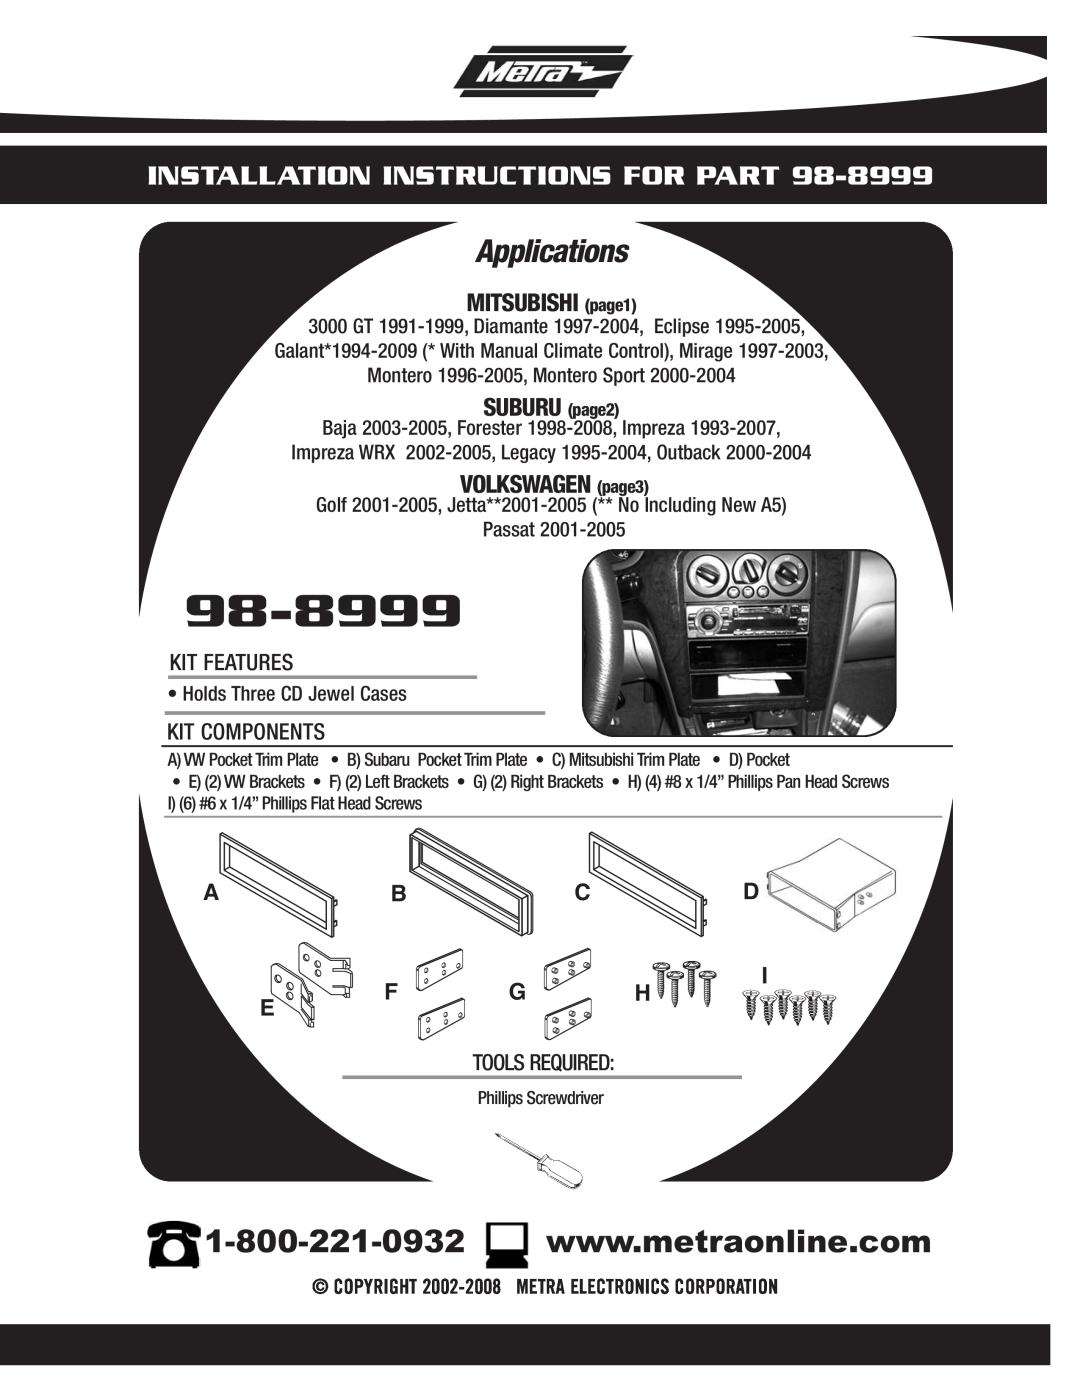 Metra Electronics 98-8999 installation instructions Applications, Installation Instructions For Part, Kit Features 